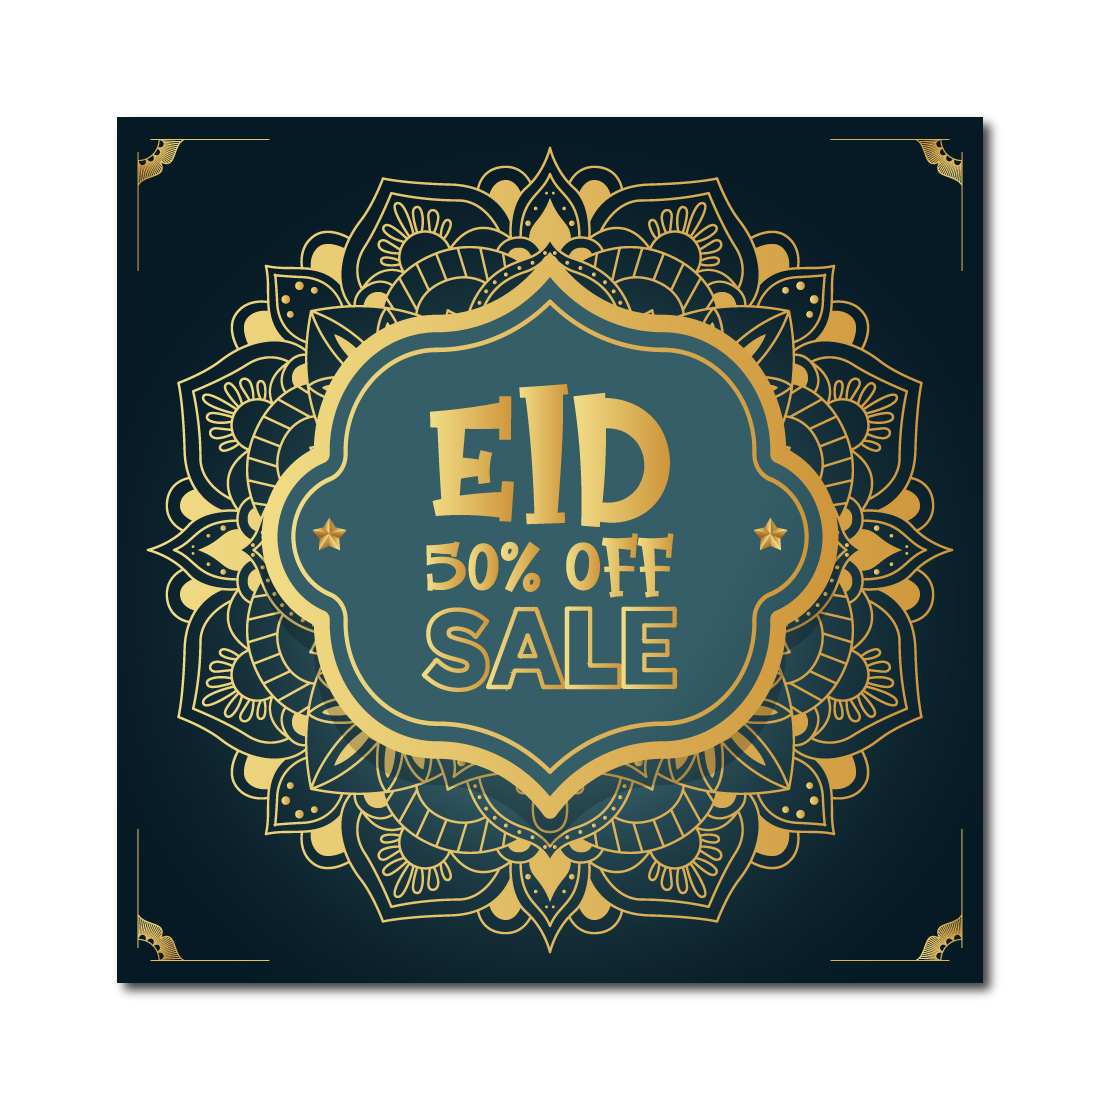 eid mubarak creative sale and discount banner or tag design preview image.